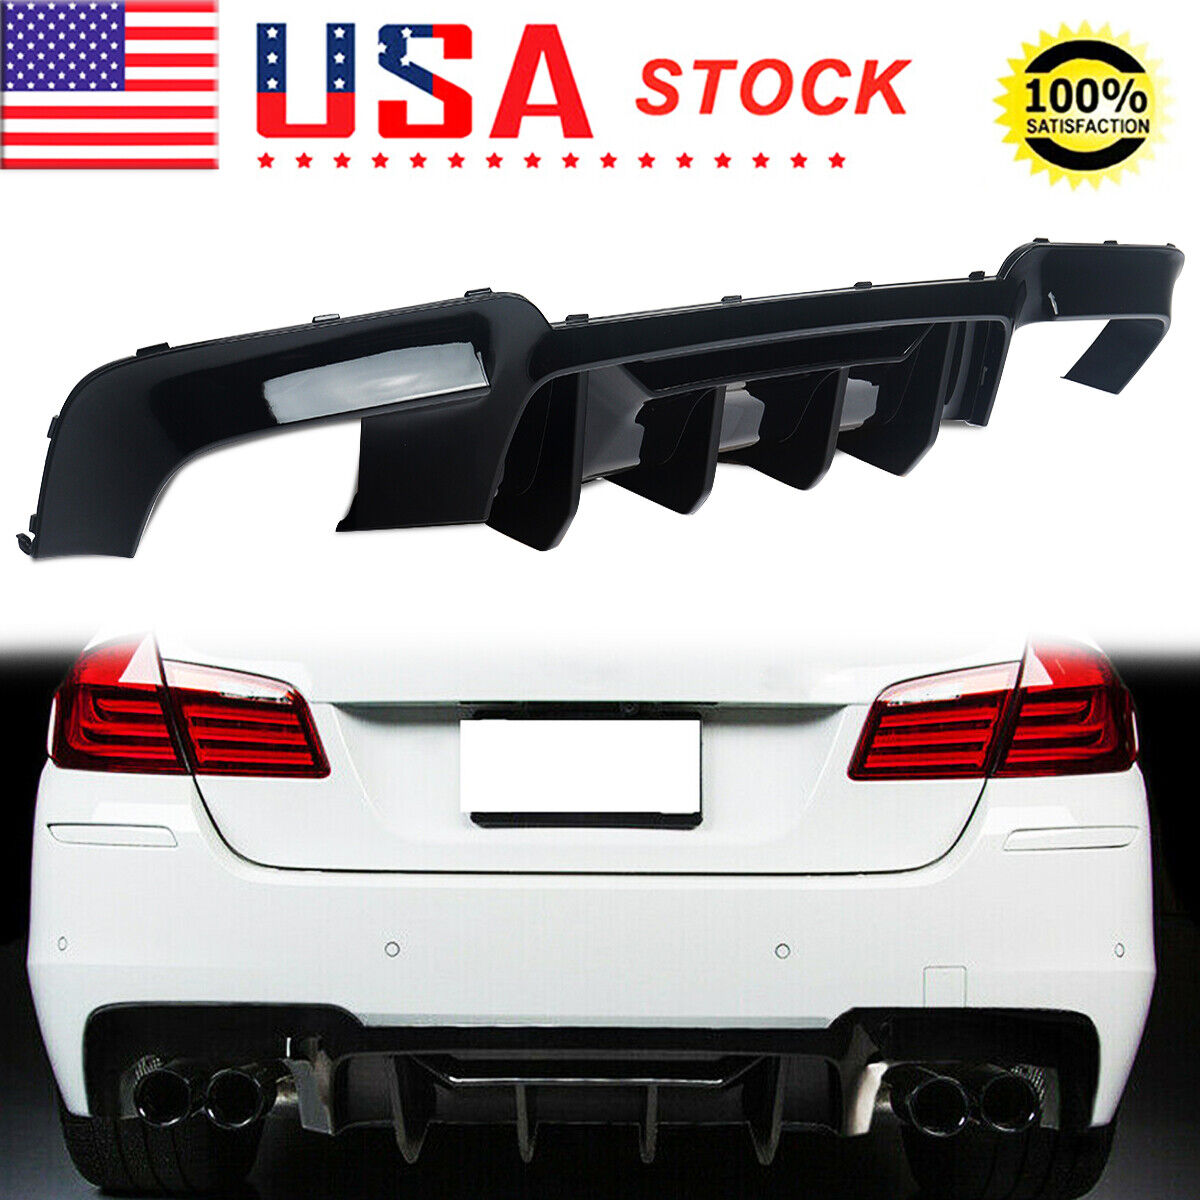 Glossy Black M5 Competition Style Rear Diffuser For BMW F10 M5 Sedan 2010-2017